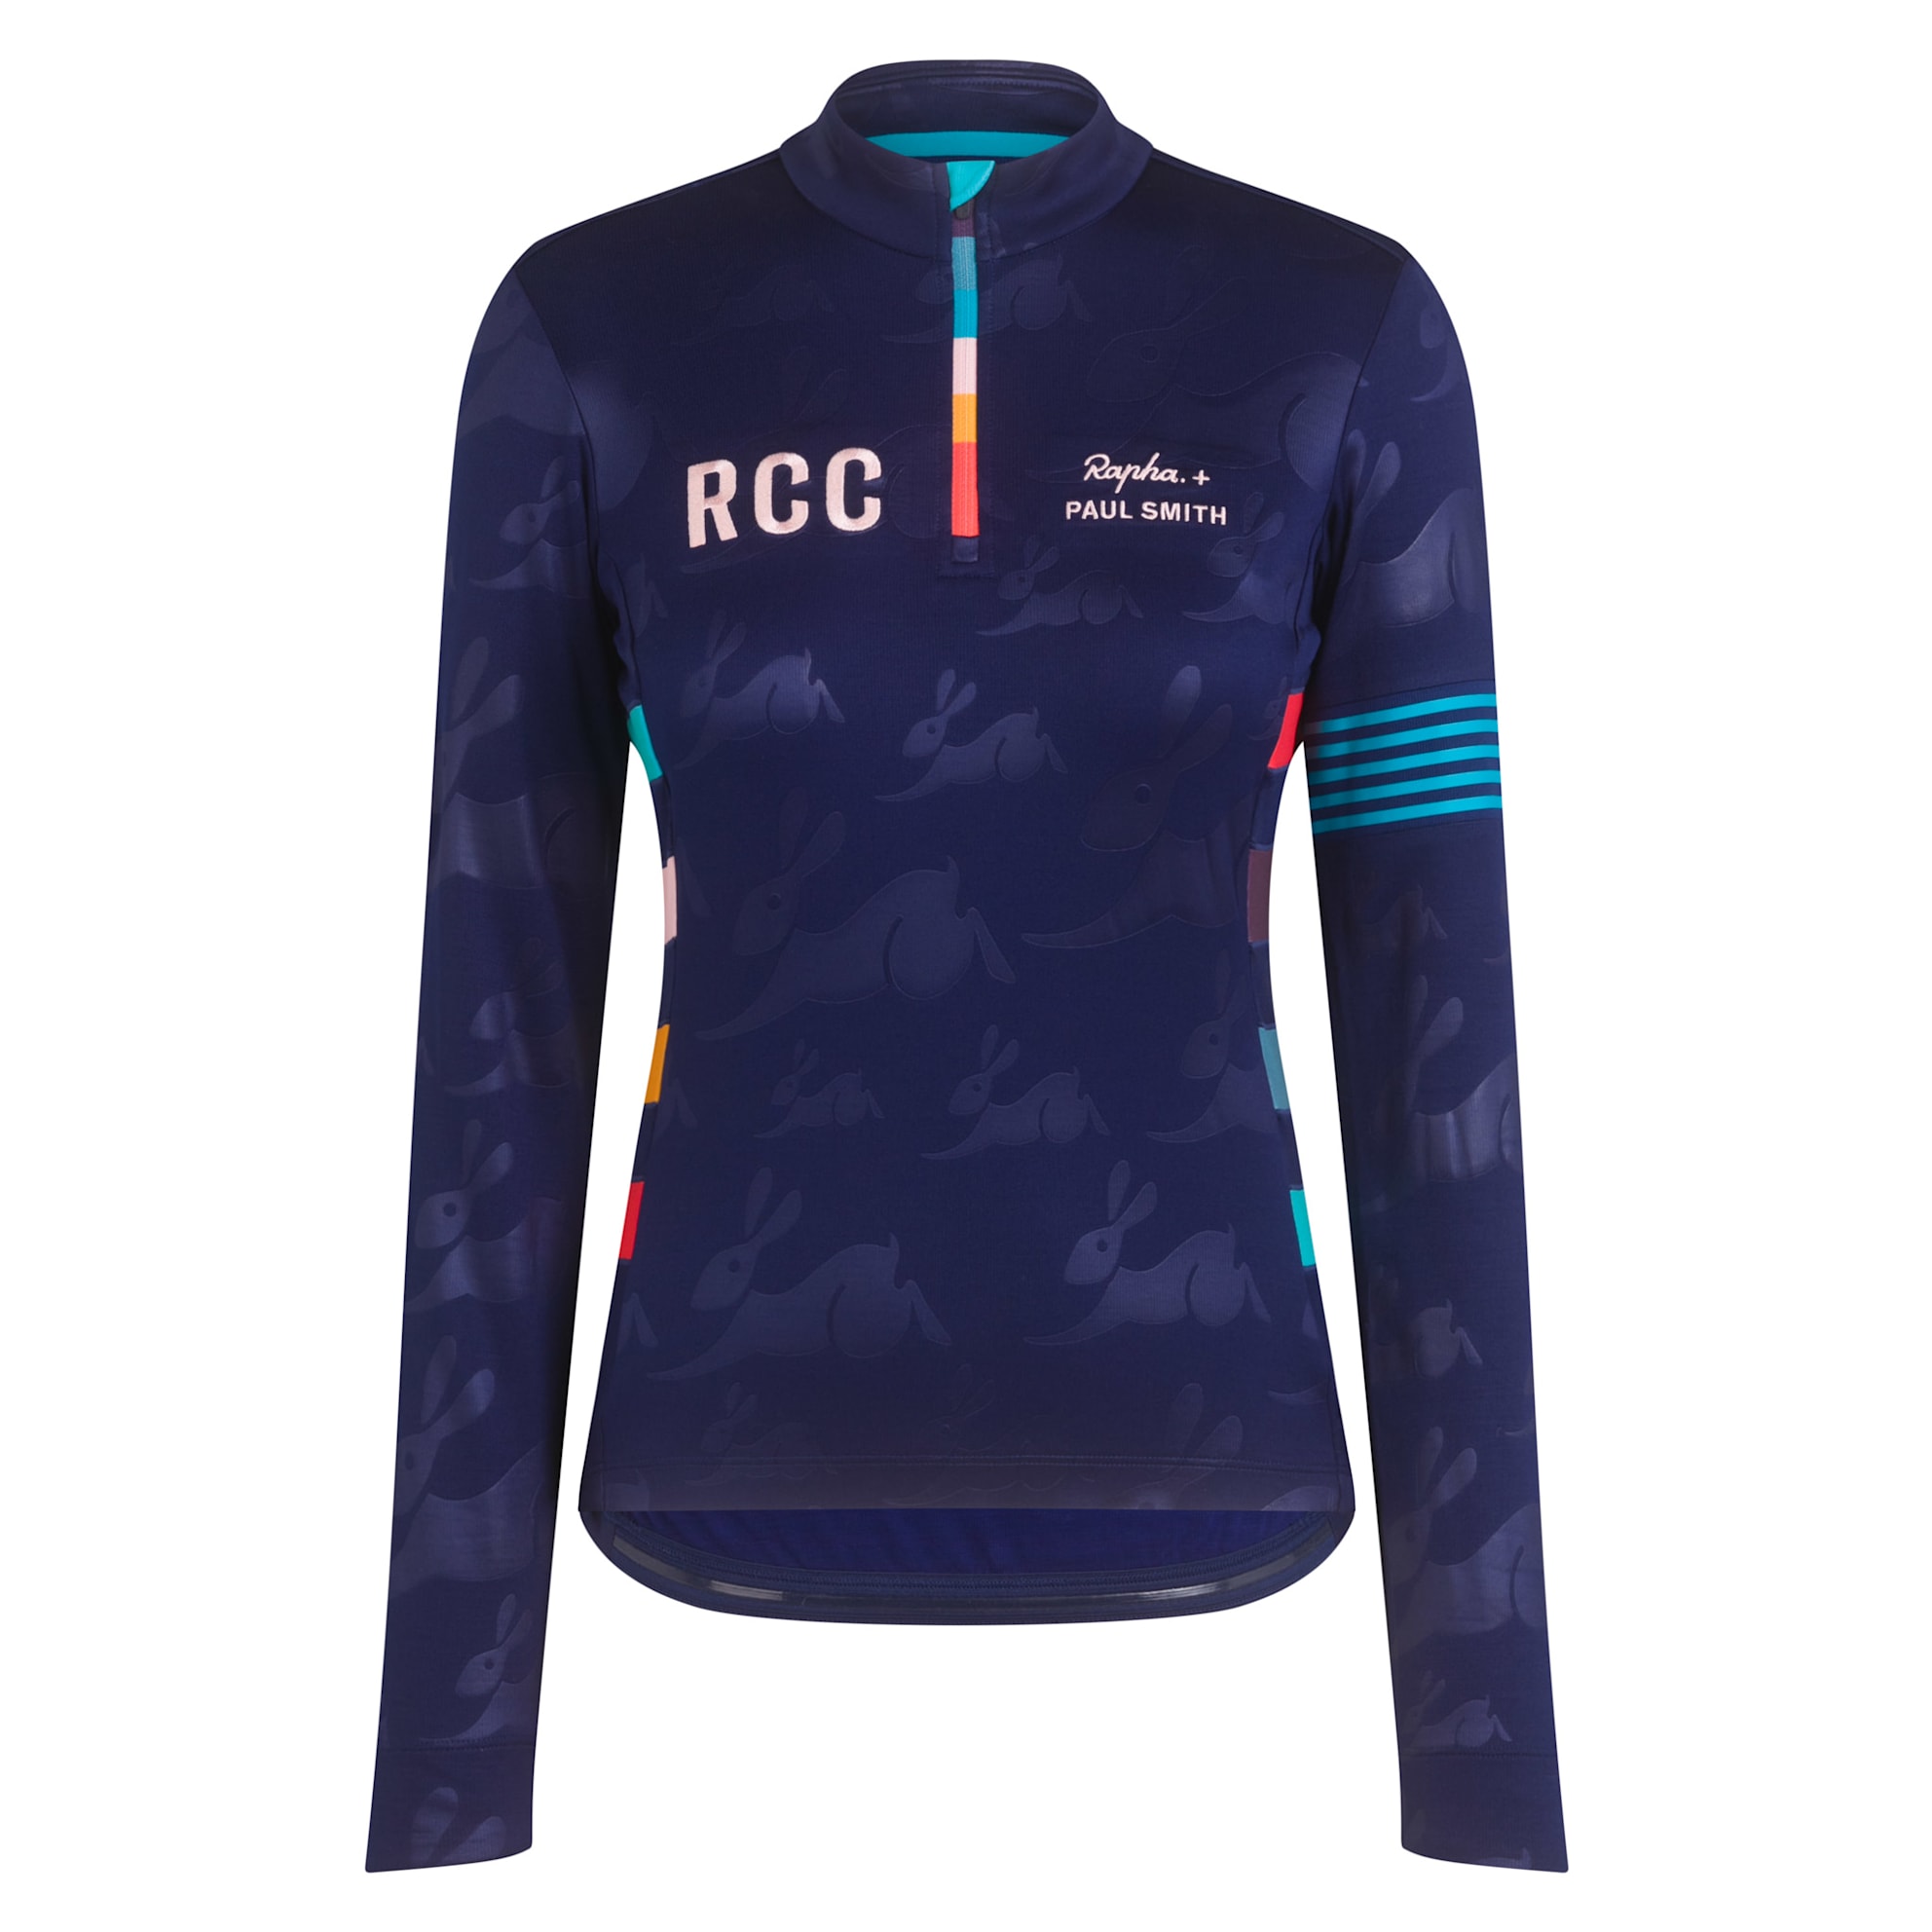 Women's Cycling Jerseys, Clothing & Accessories | Rapha Site